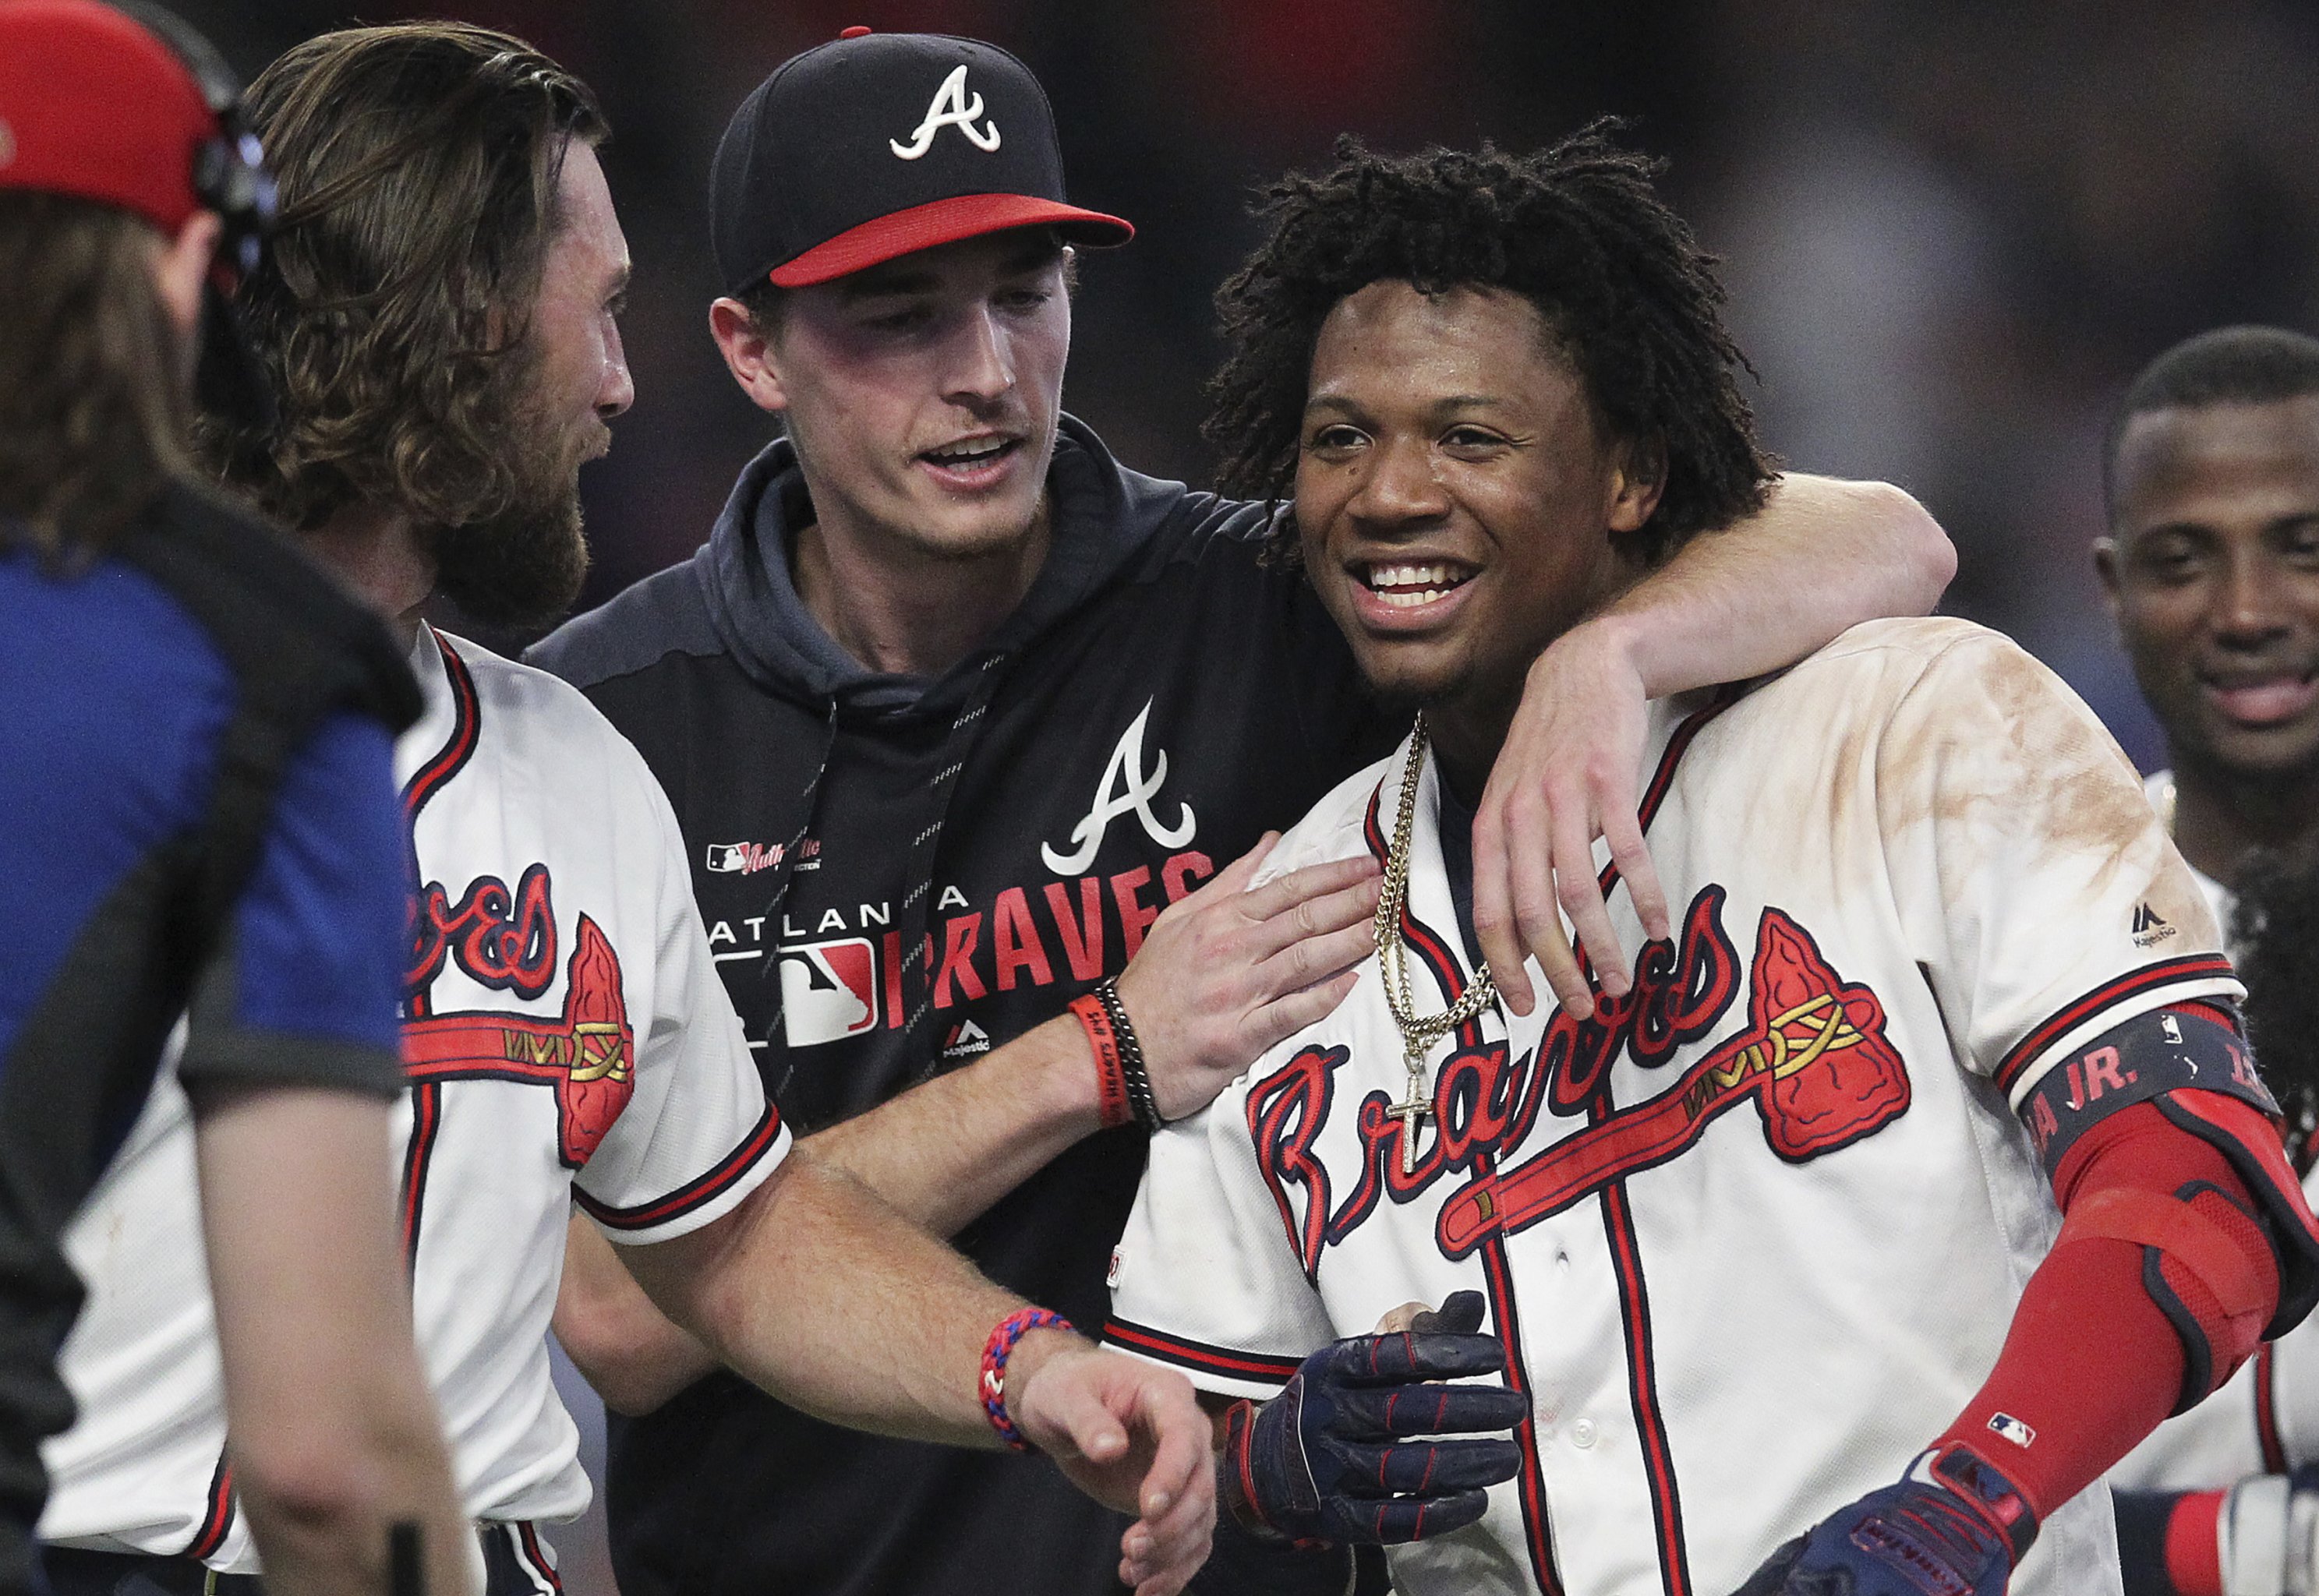 From the Minors to the Majors: Celebrate Ronald Acuña Jr.'s